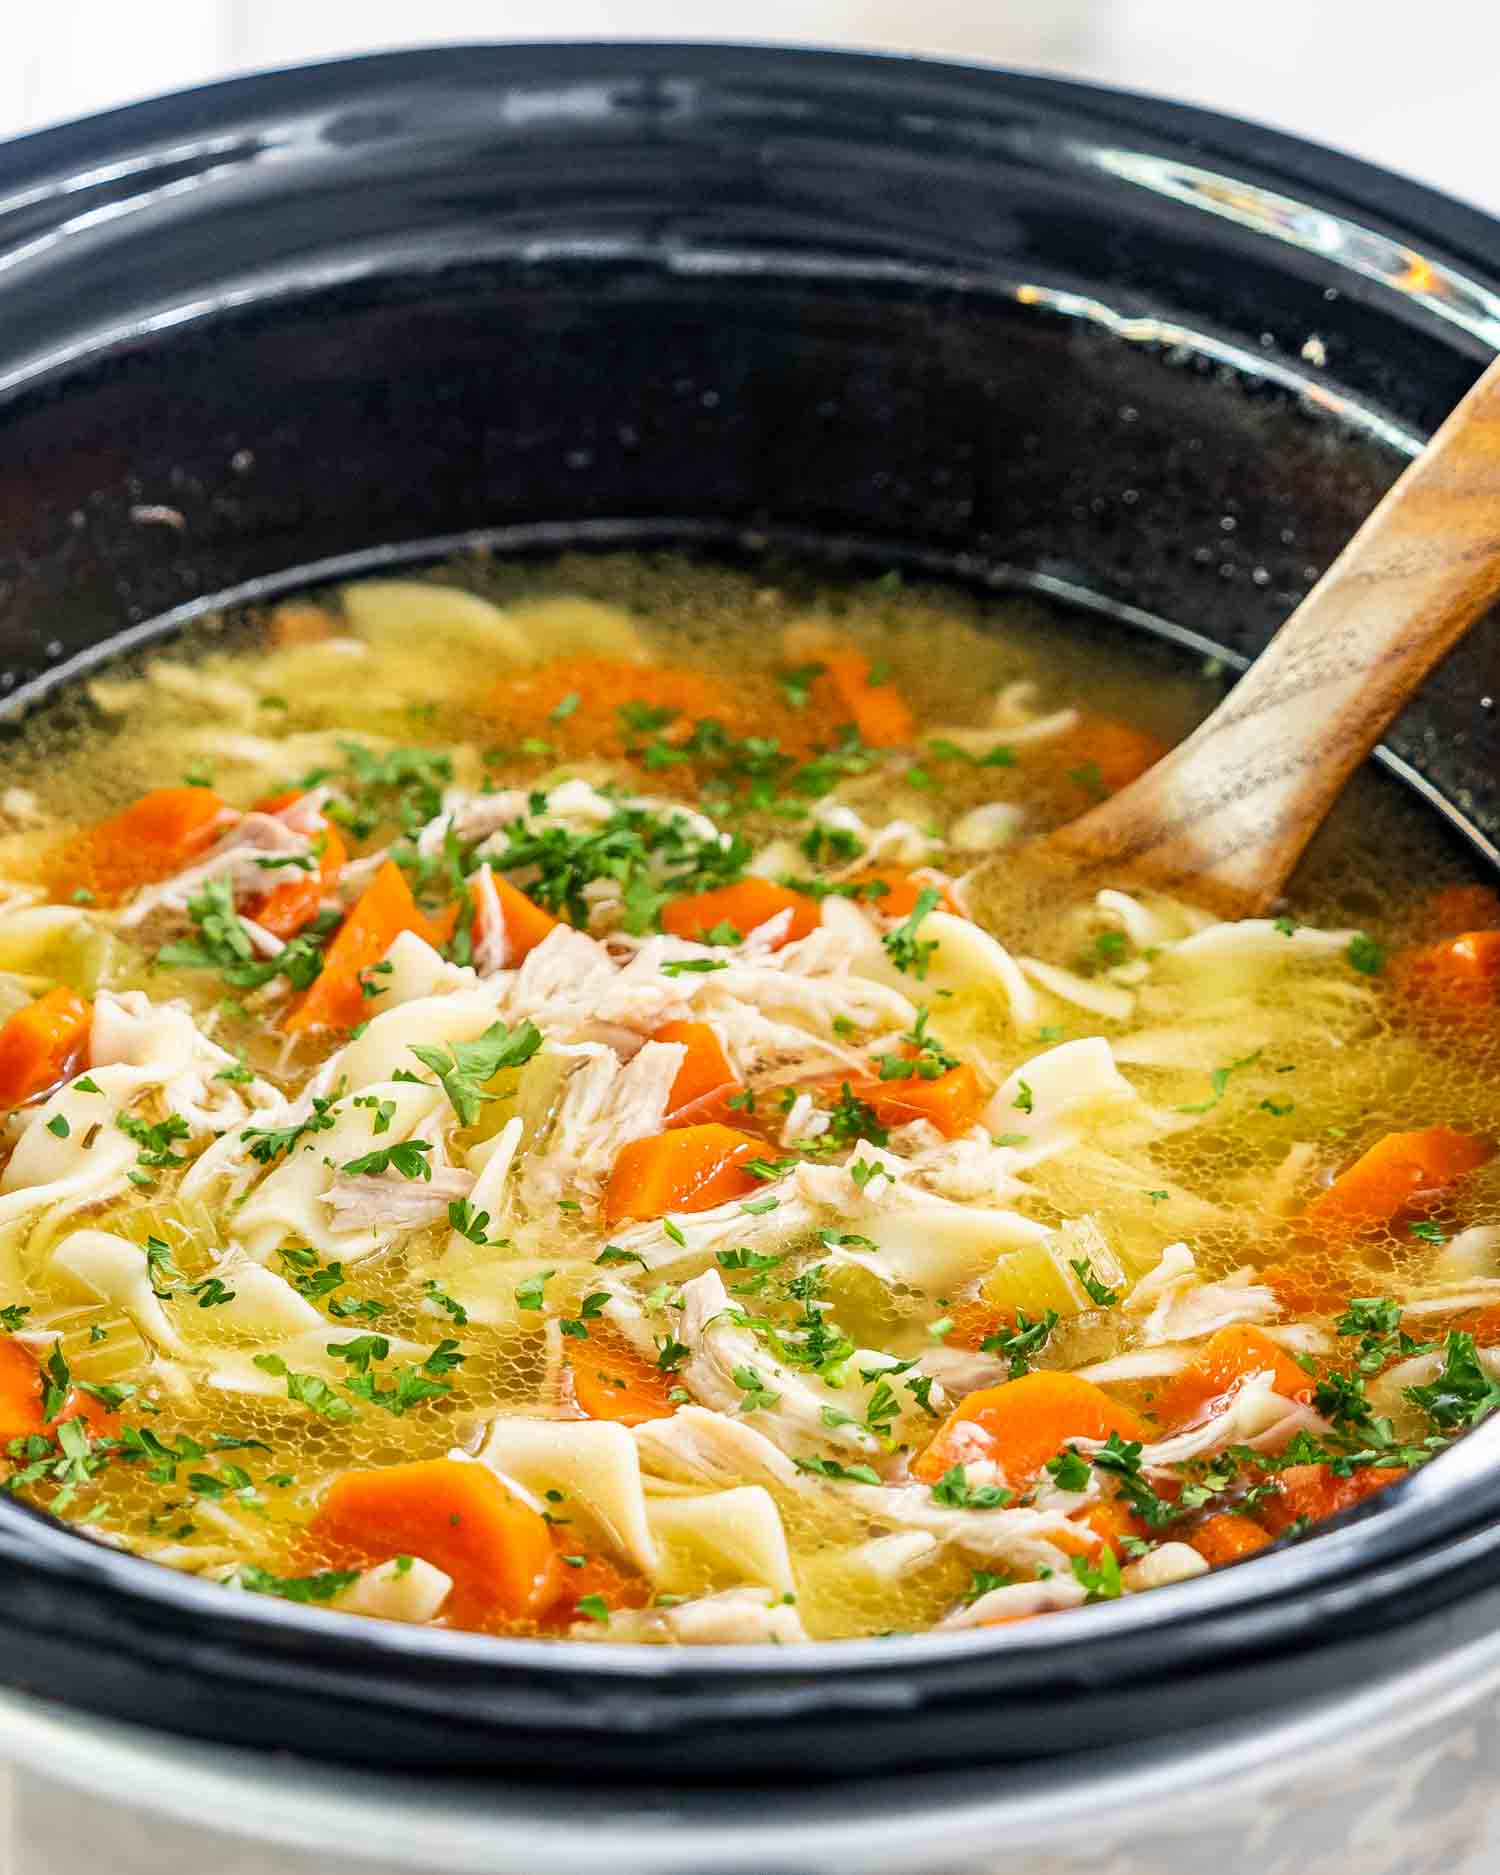 chicken noodle soup in a crockpot.